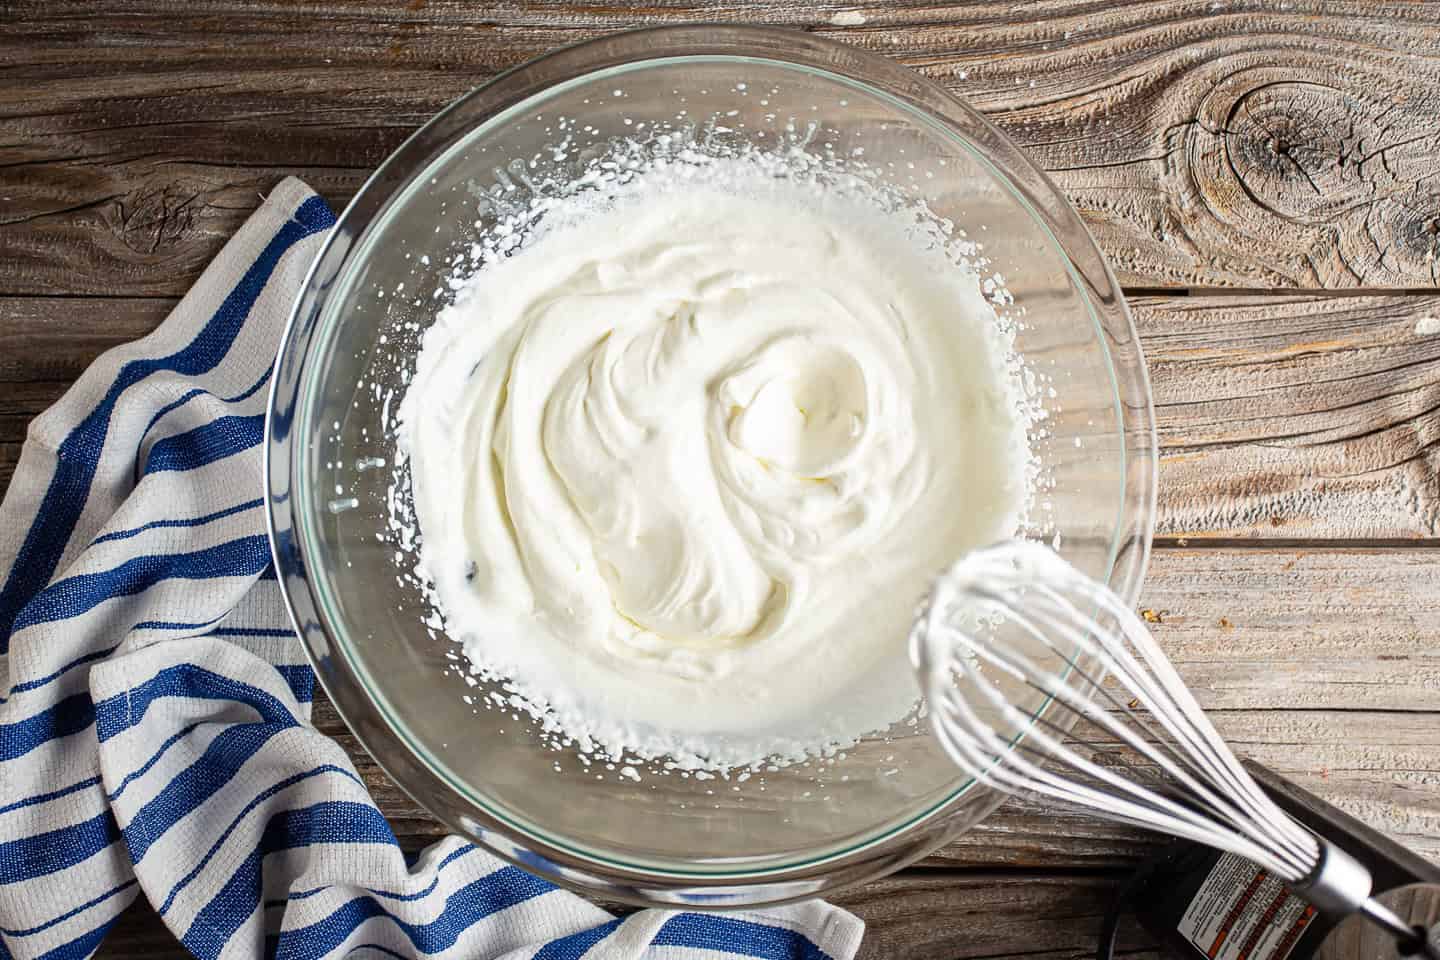 Whipping cream with a handheld electric mixer.